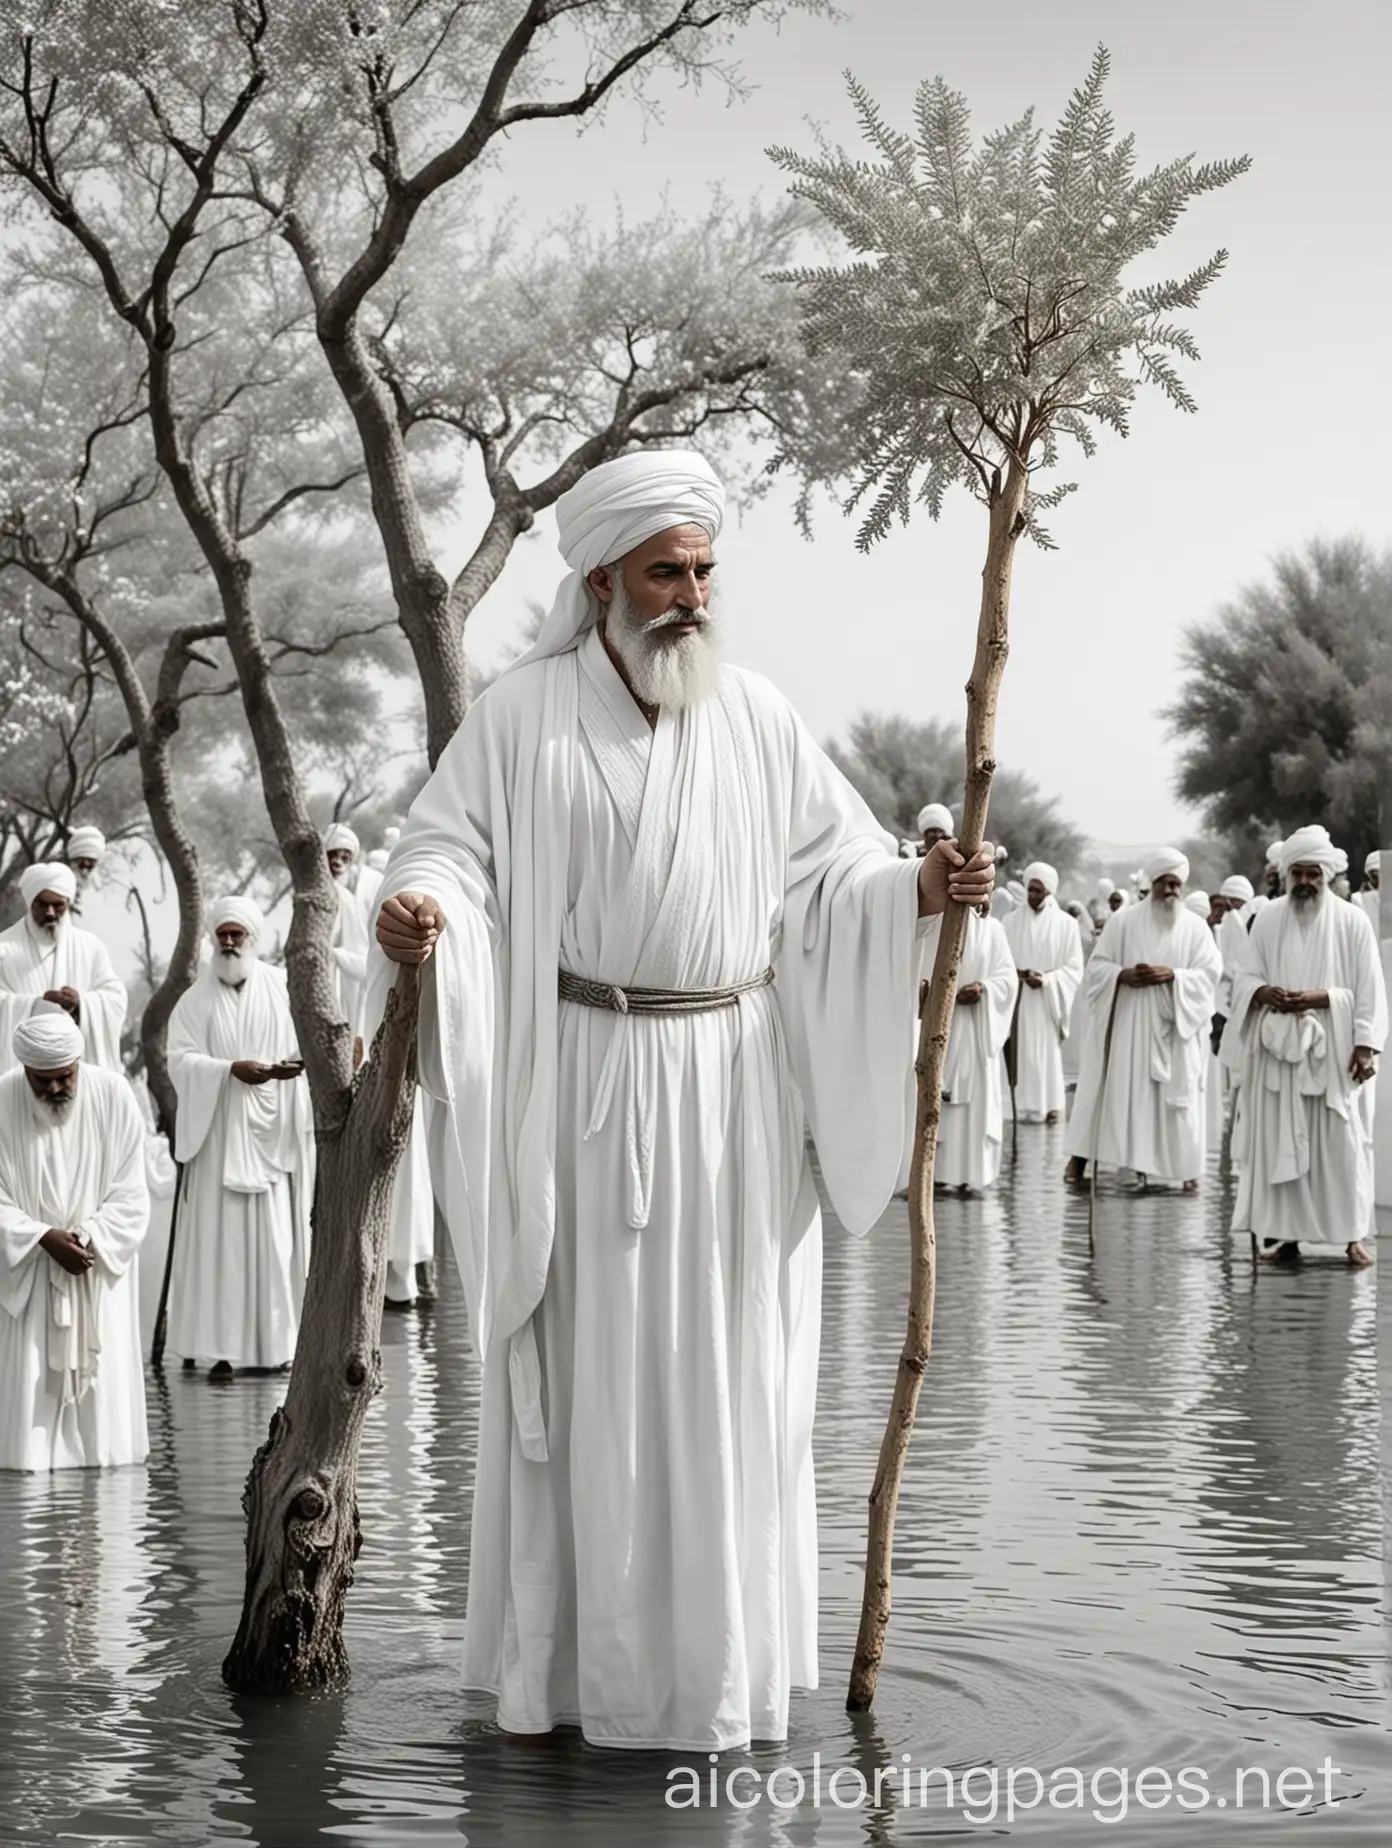 Religious-Middle-Eastern-Man-Standing-in-Water-Surrounded-by-Majestic-Figures